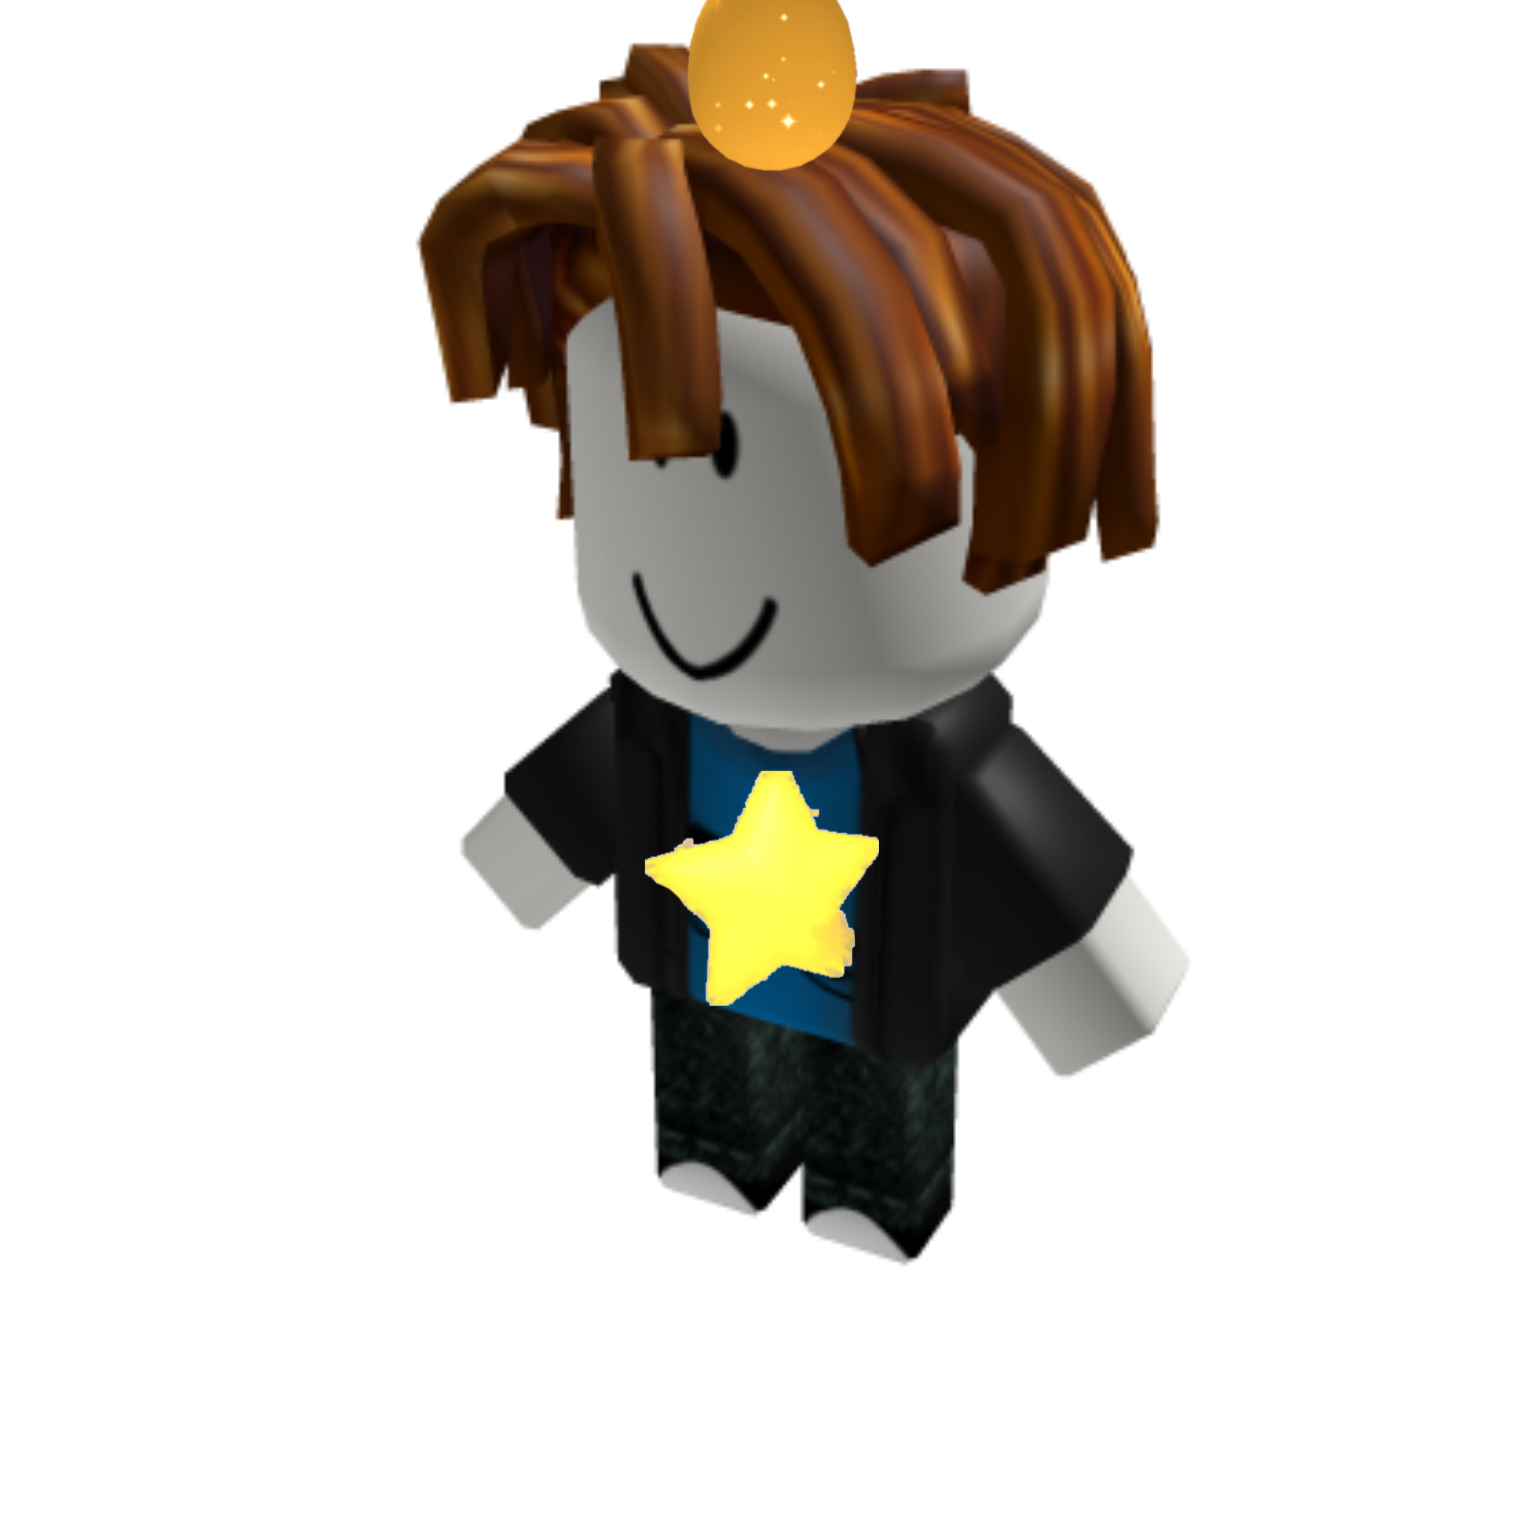 baconmanmy let me out is herehero roblox bacon saves girl